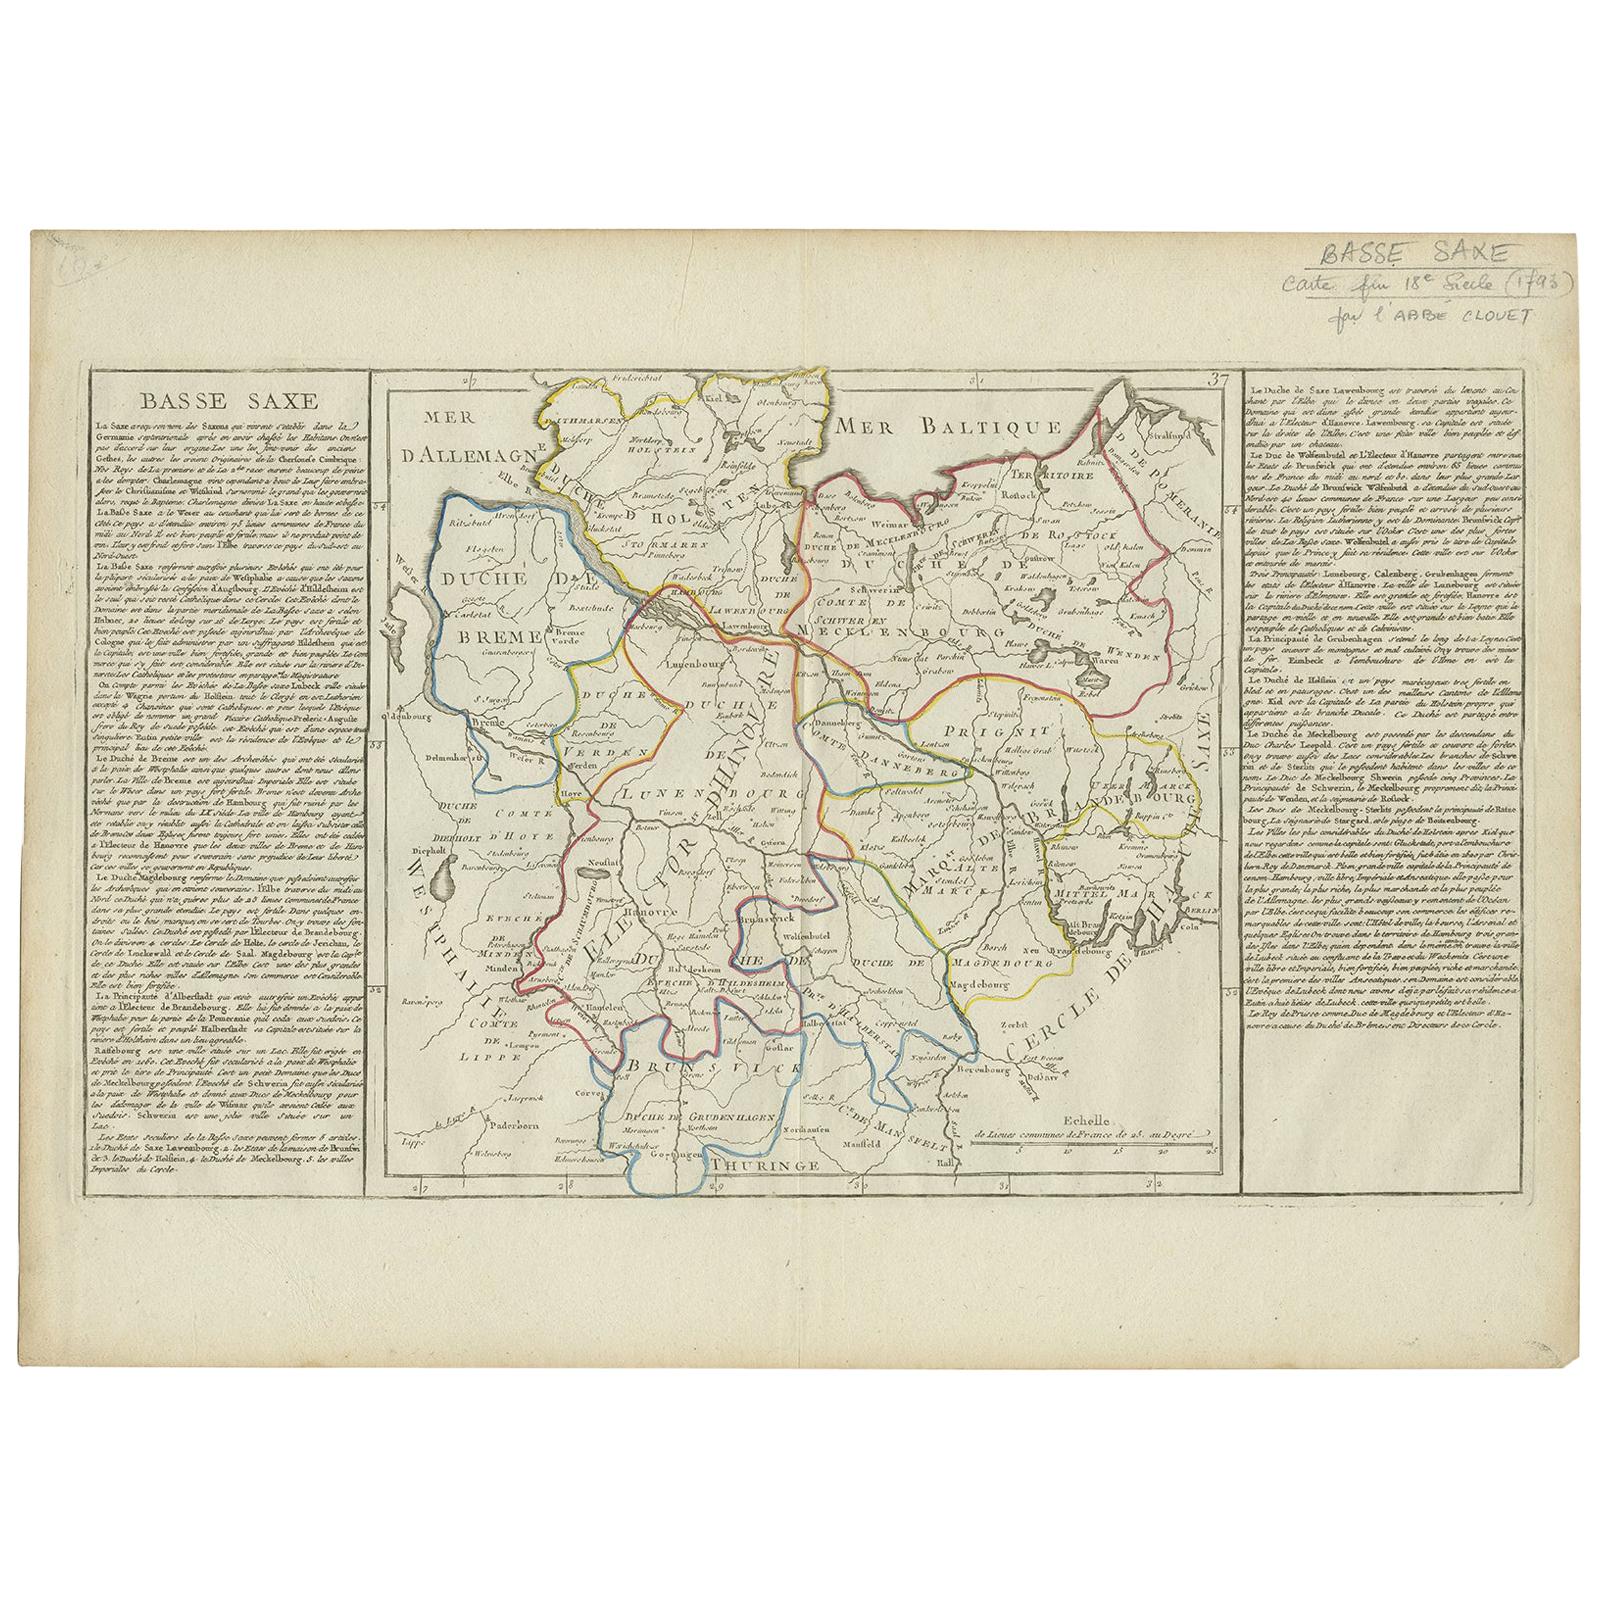 Antique Map of Lower Saxony by Clouet, 1787